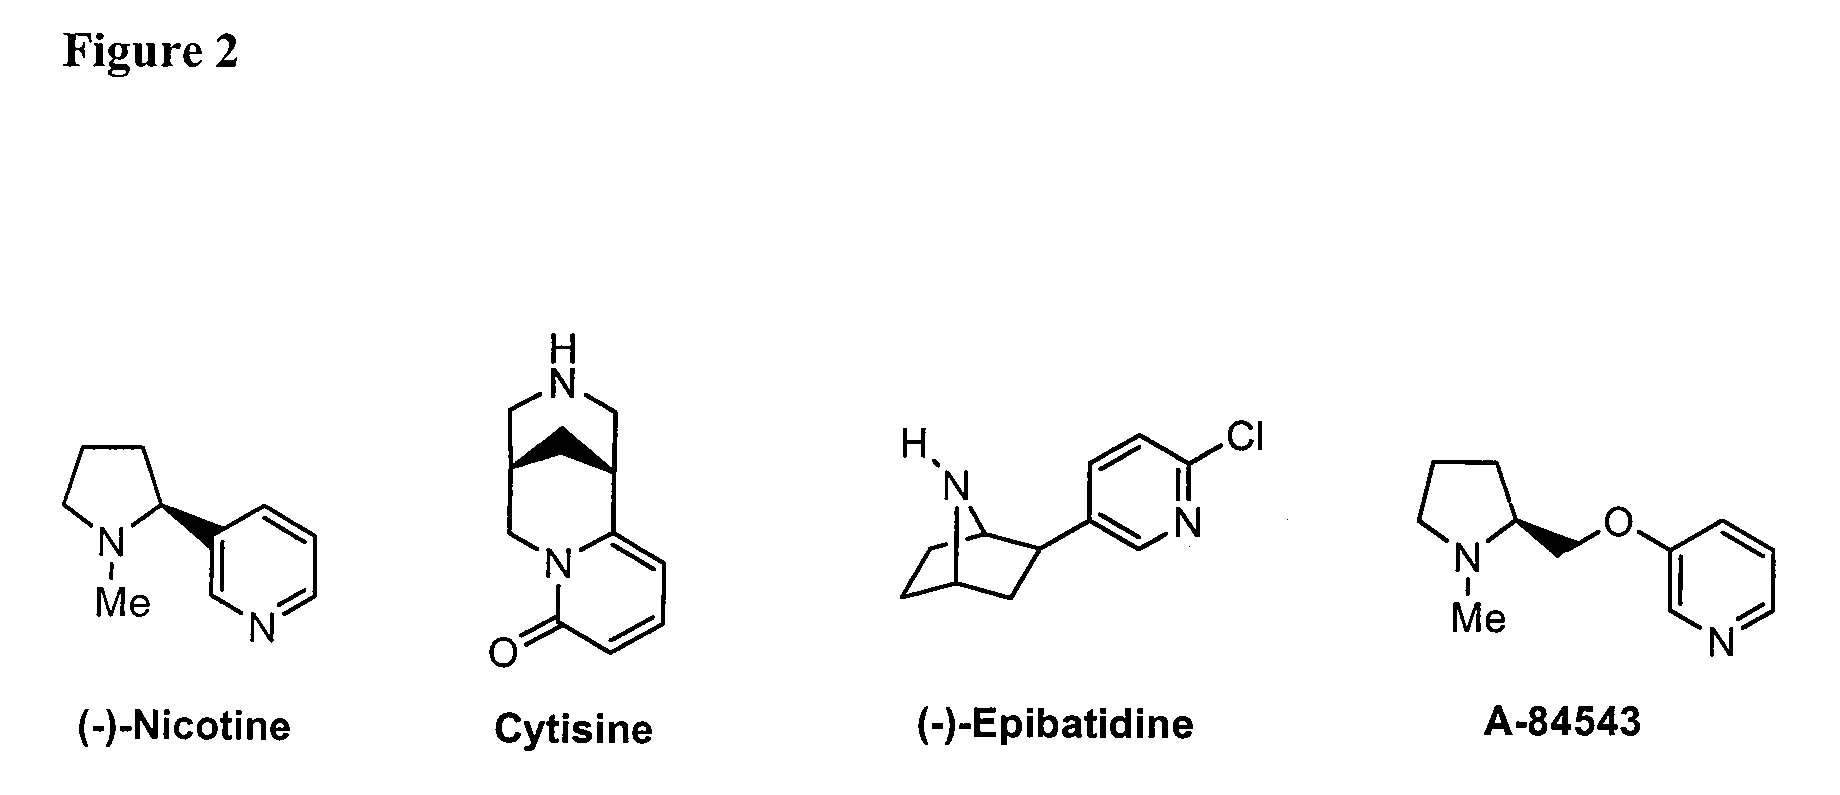 10-Substituted Cytisine Derivatives and Methods of Use Thereof